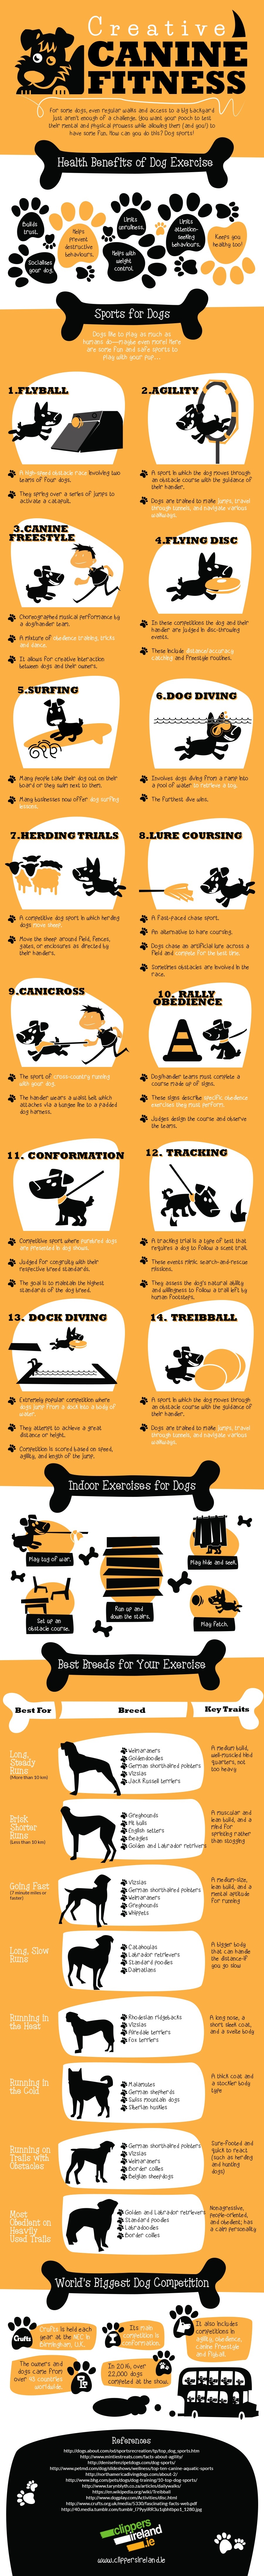 Creative Canine FItness Infographic